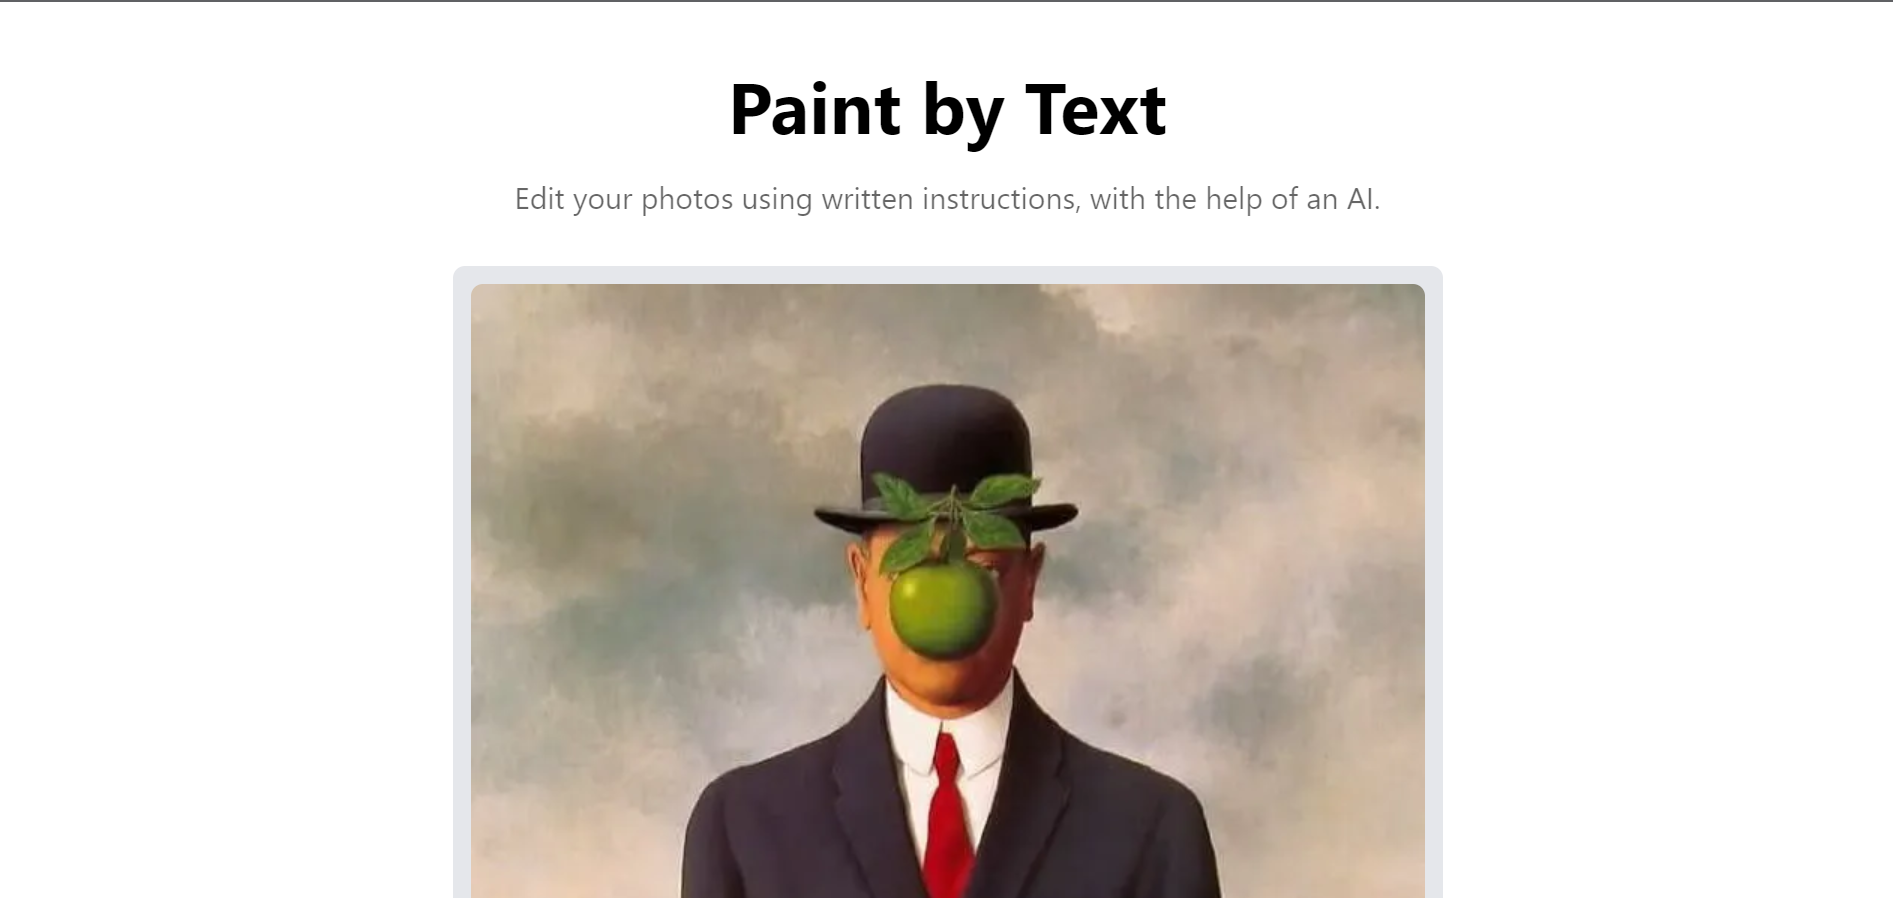 Transform your photos with just a few words using PaintbyText.chat!